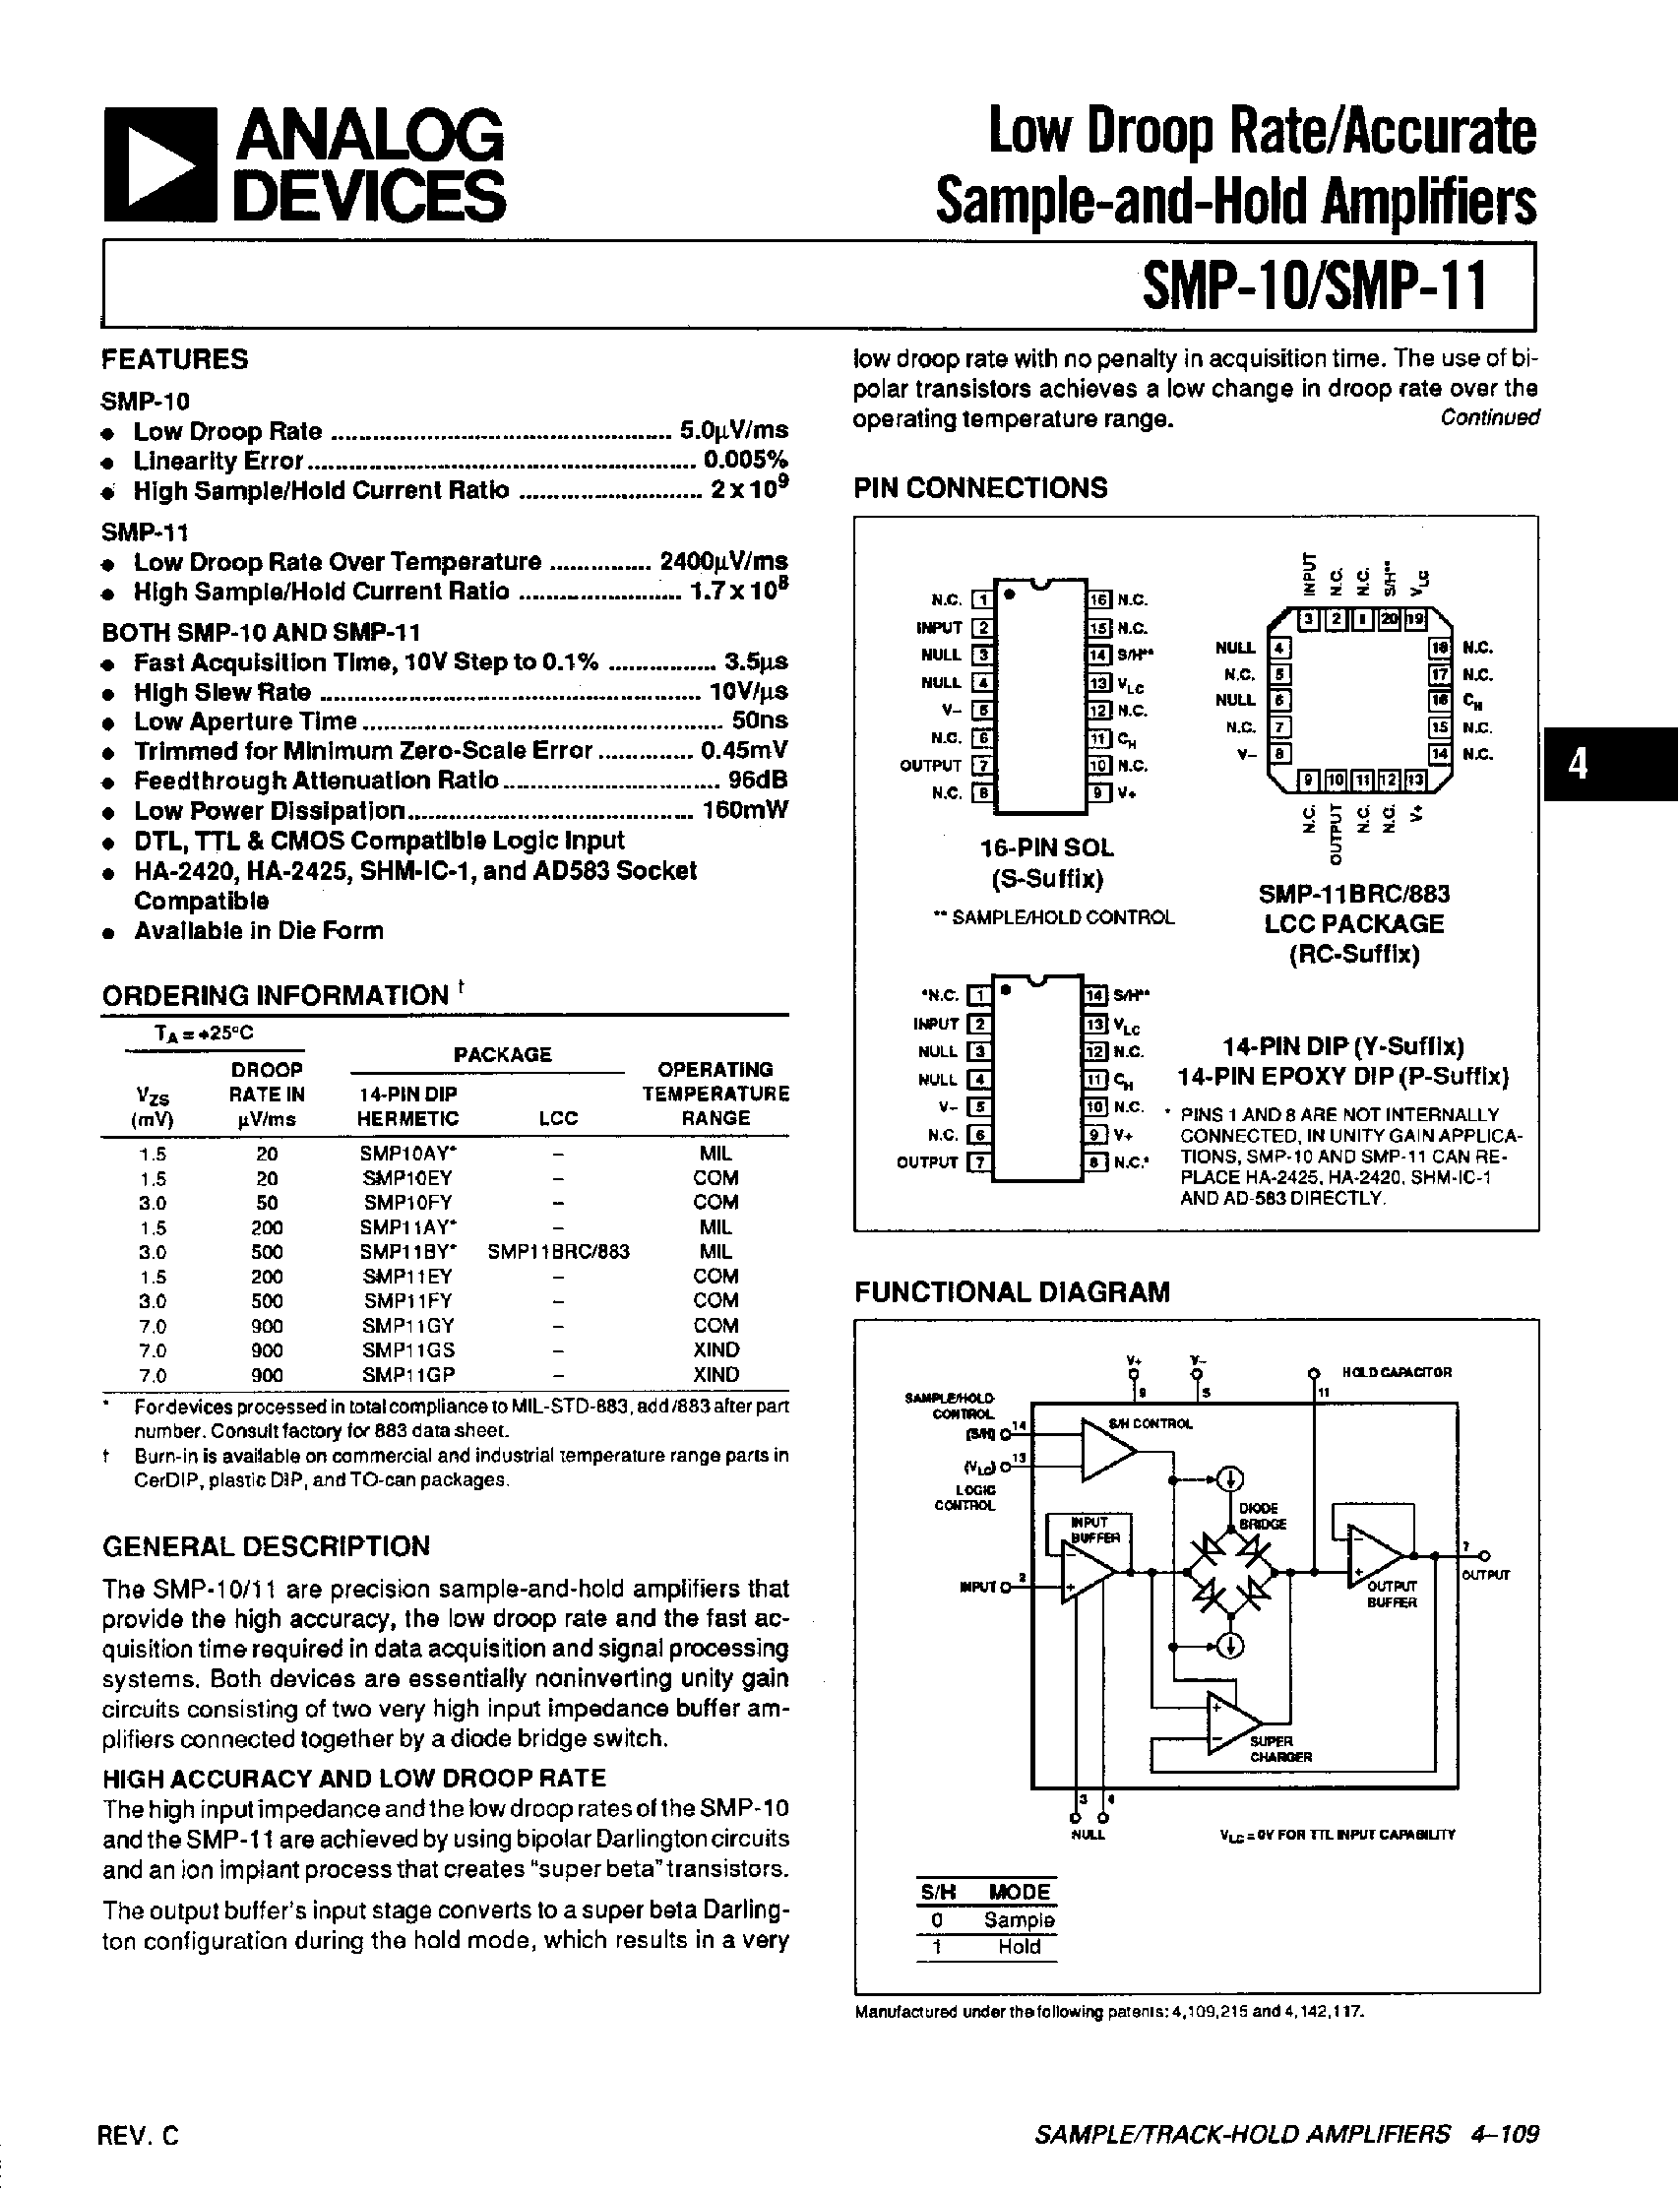 Datasheet SMP-10 - (SMP-10 / SMP-11) Low Droop Rate/Accurate Sample-andHold Amplifiers page 1